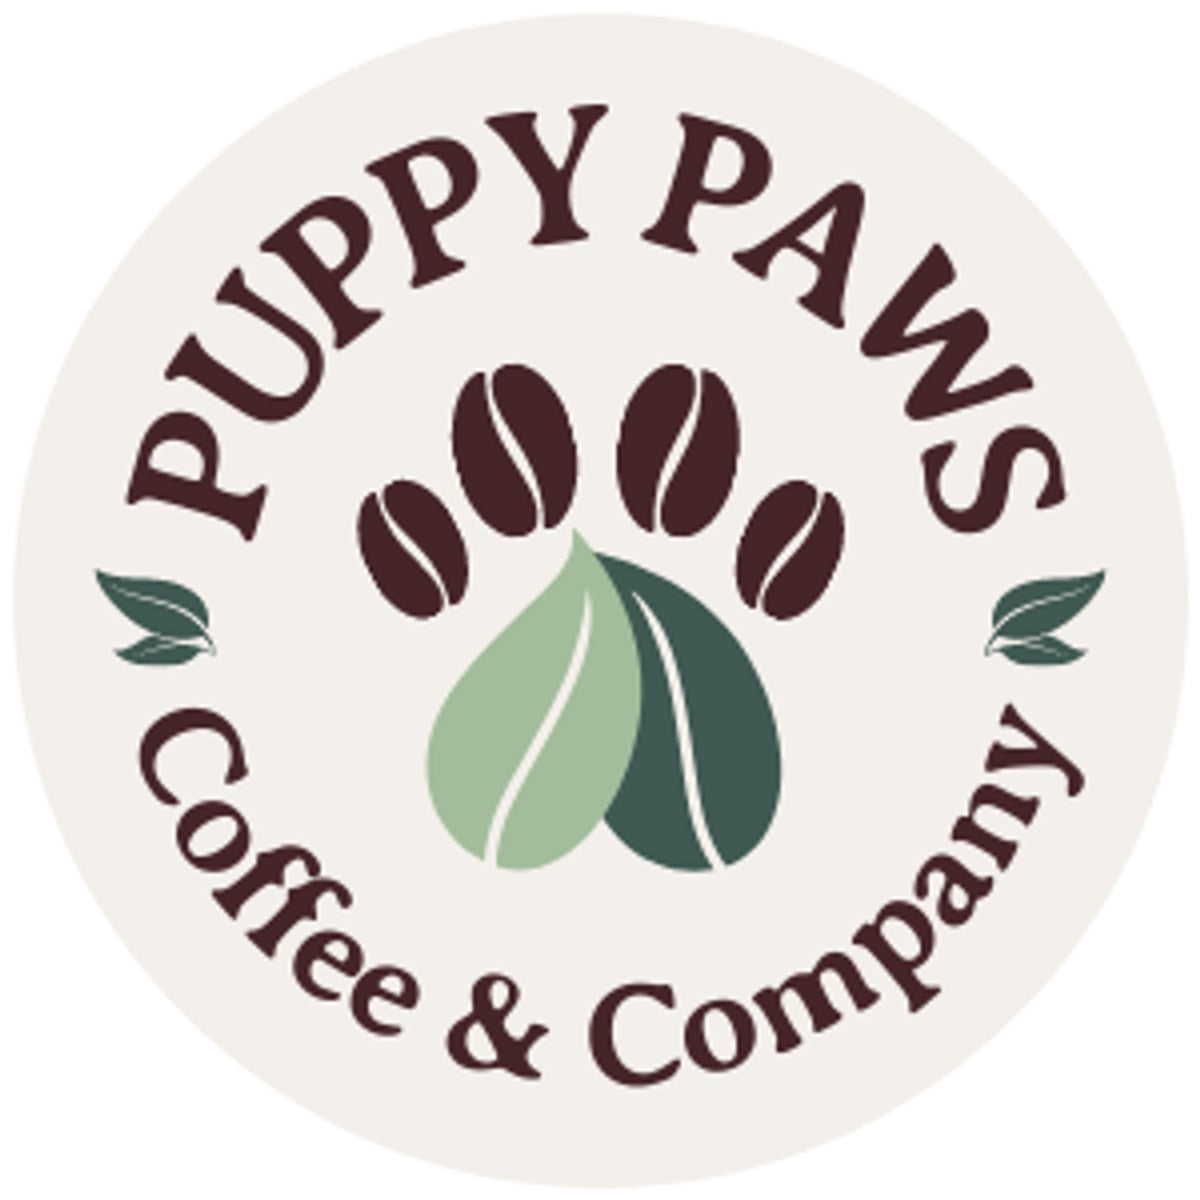 Glass Milk carton container – Puppy Paws Coffee & Company